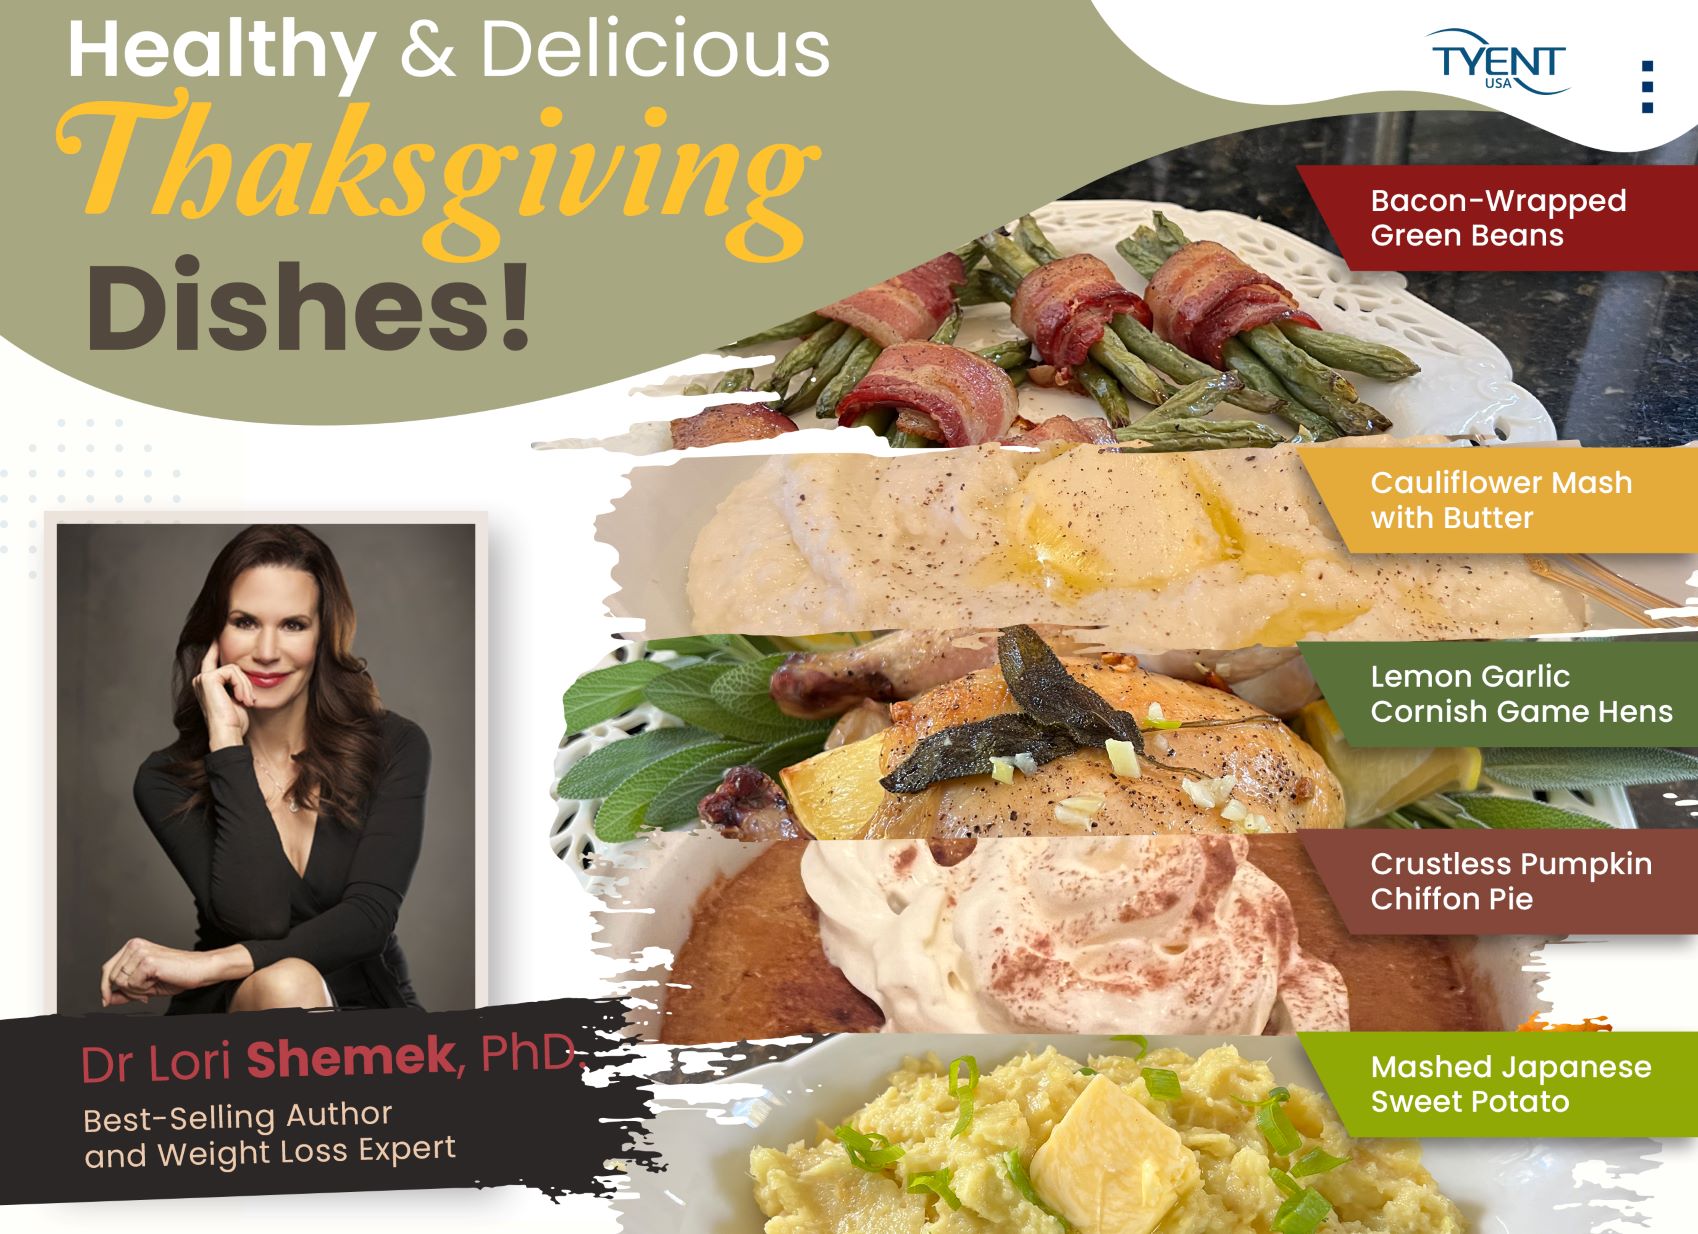 Healthy and Delicious Thanksgiving Dishes